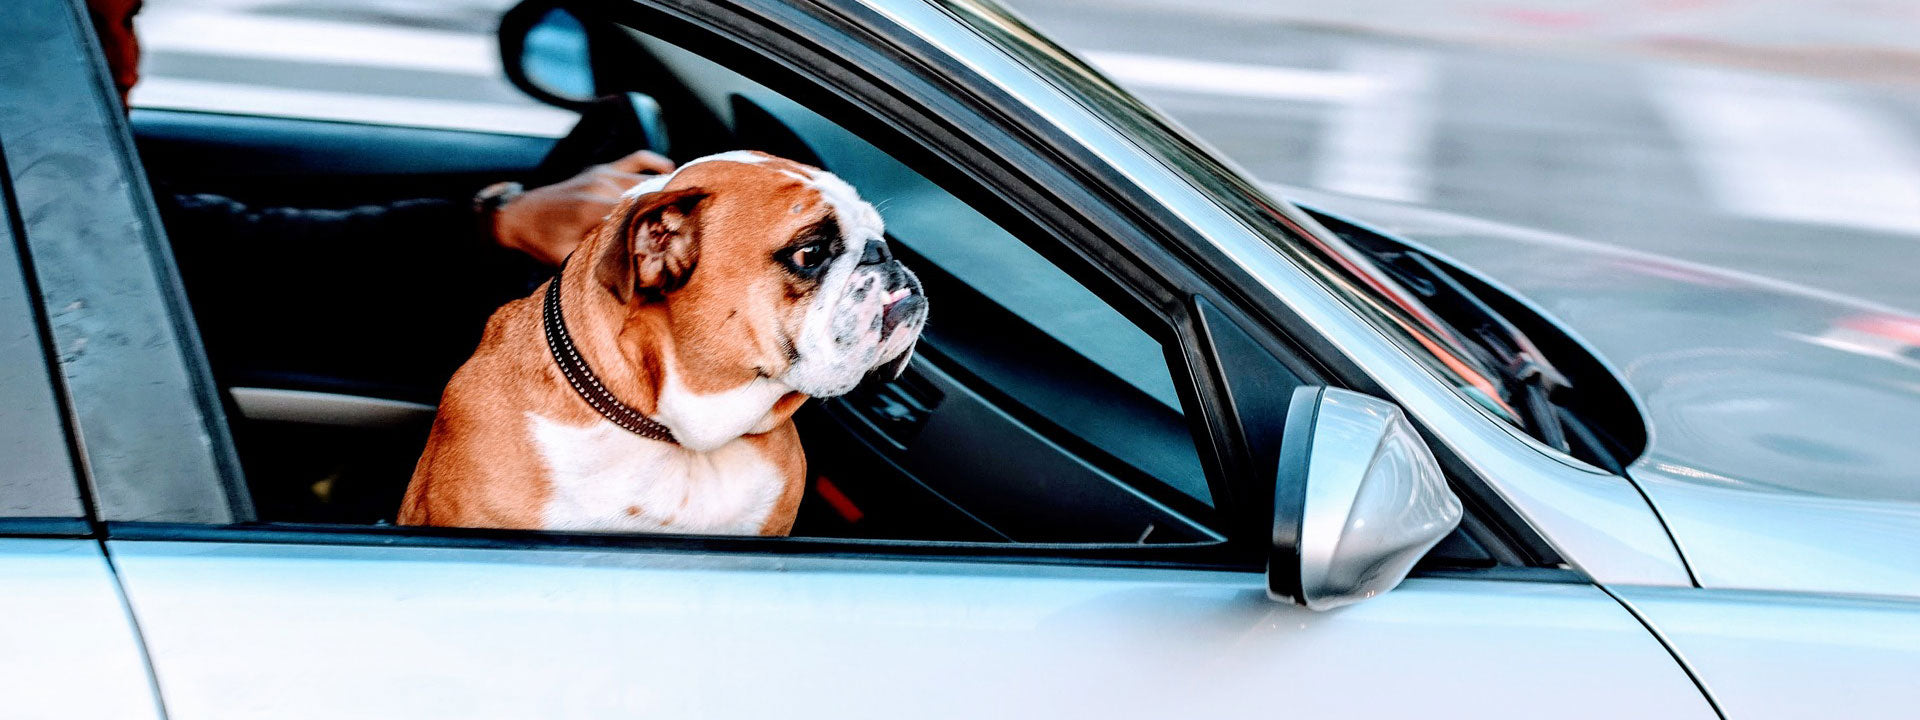 Bulldog riding in the front seat of a seat with the window down.